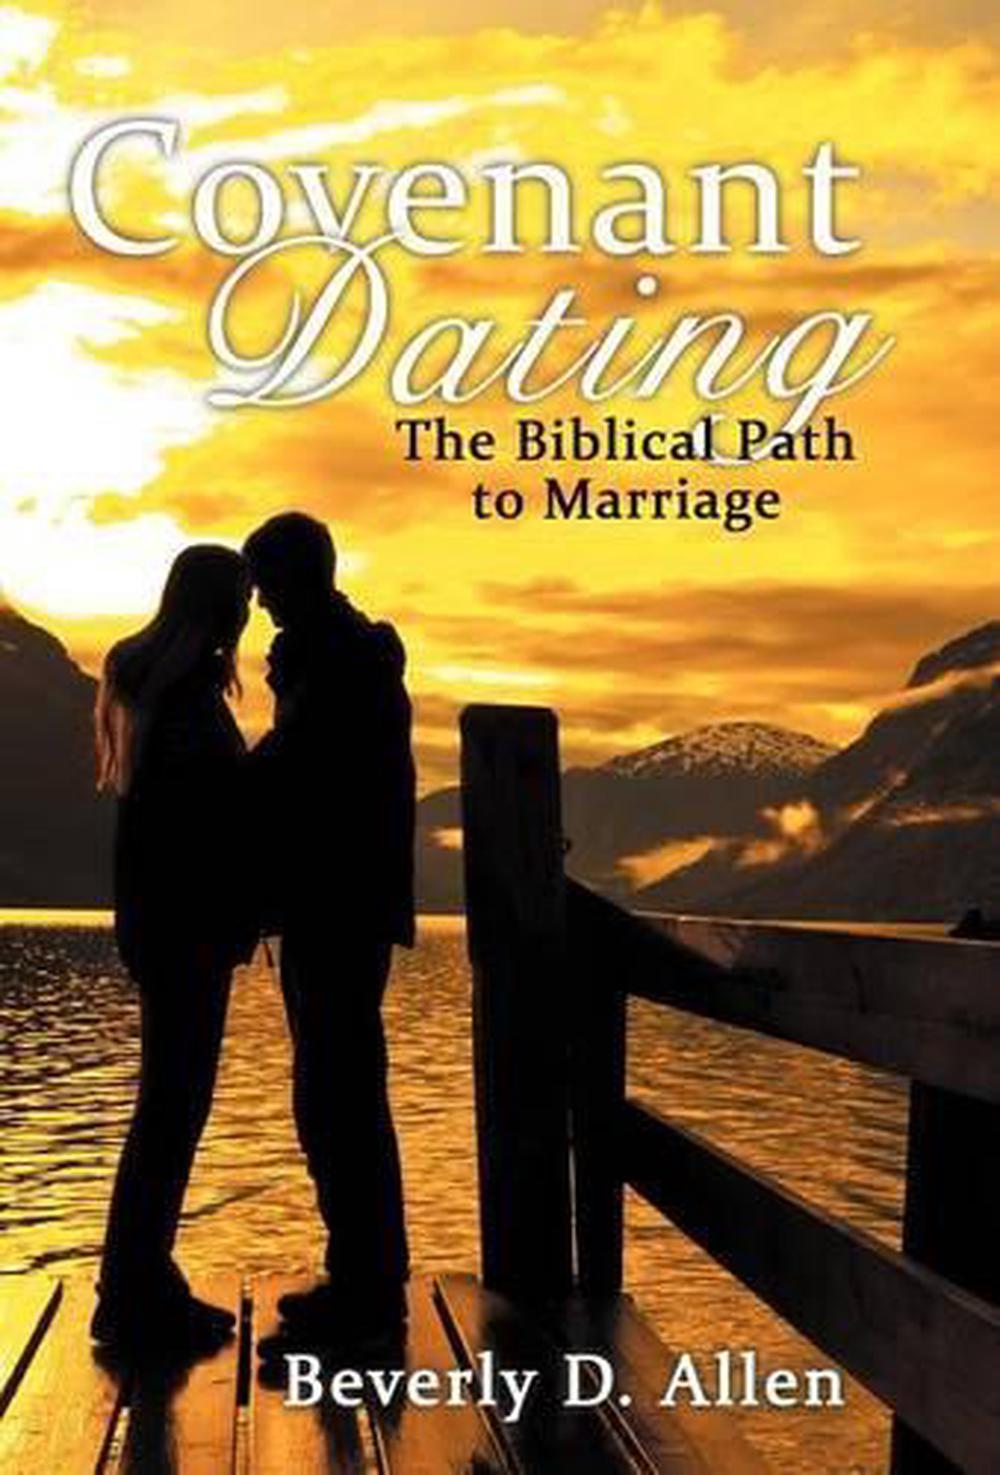 dating with christian principles for men